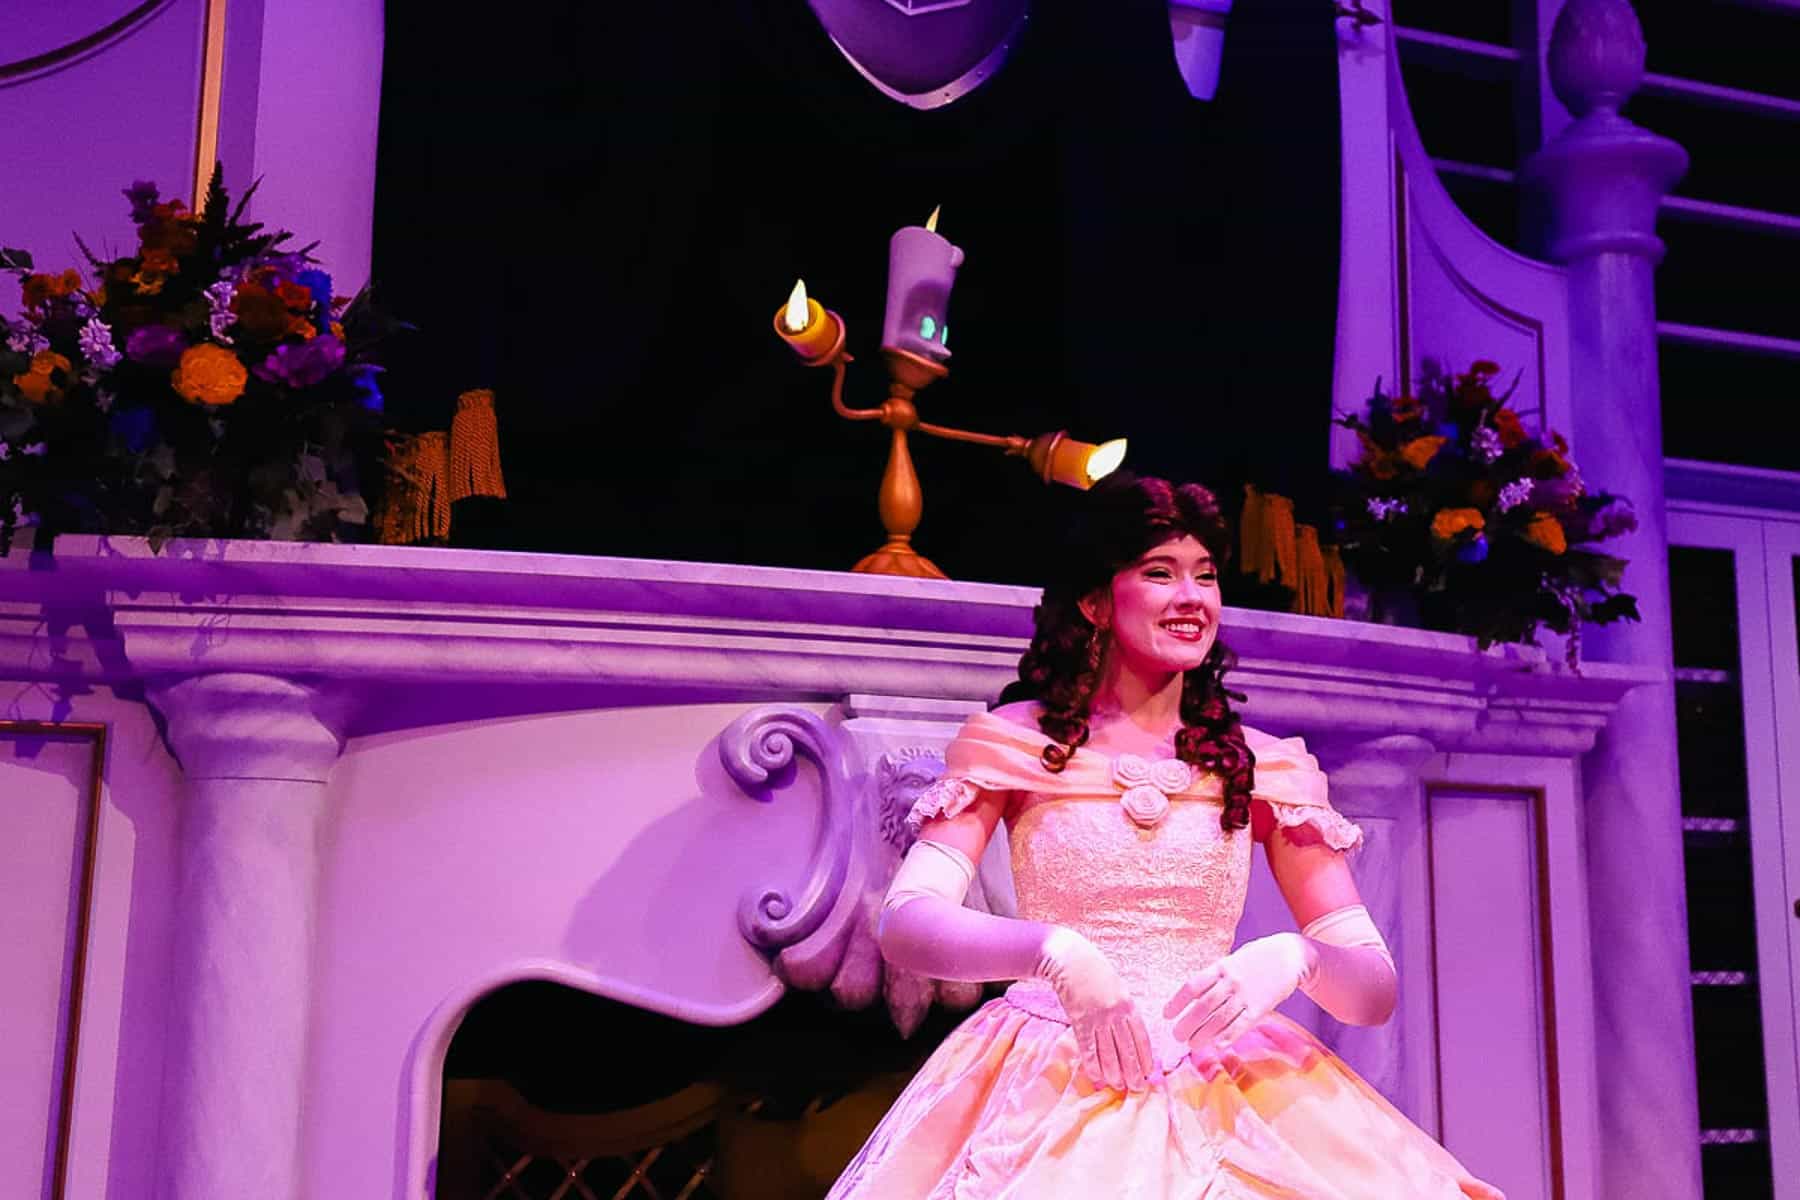 Belle smiles to guests with Lumiere on the mantle behind her. 